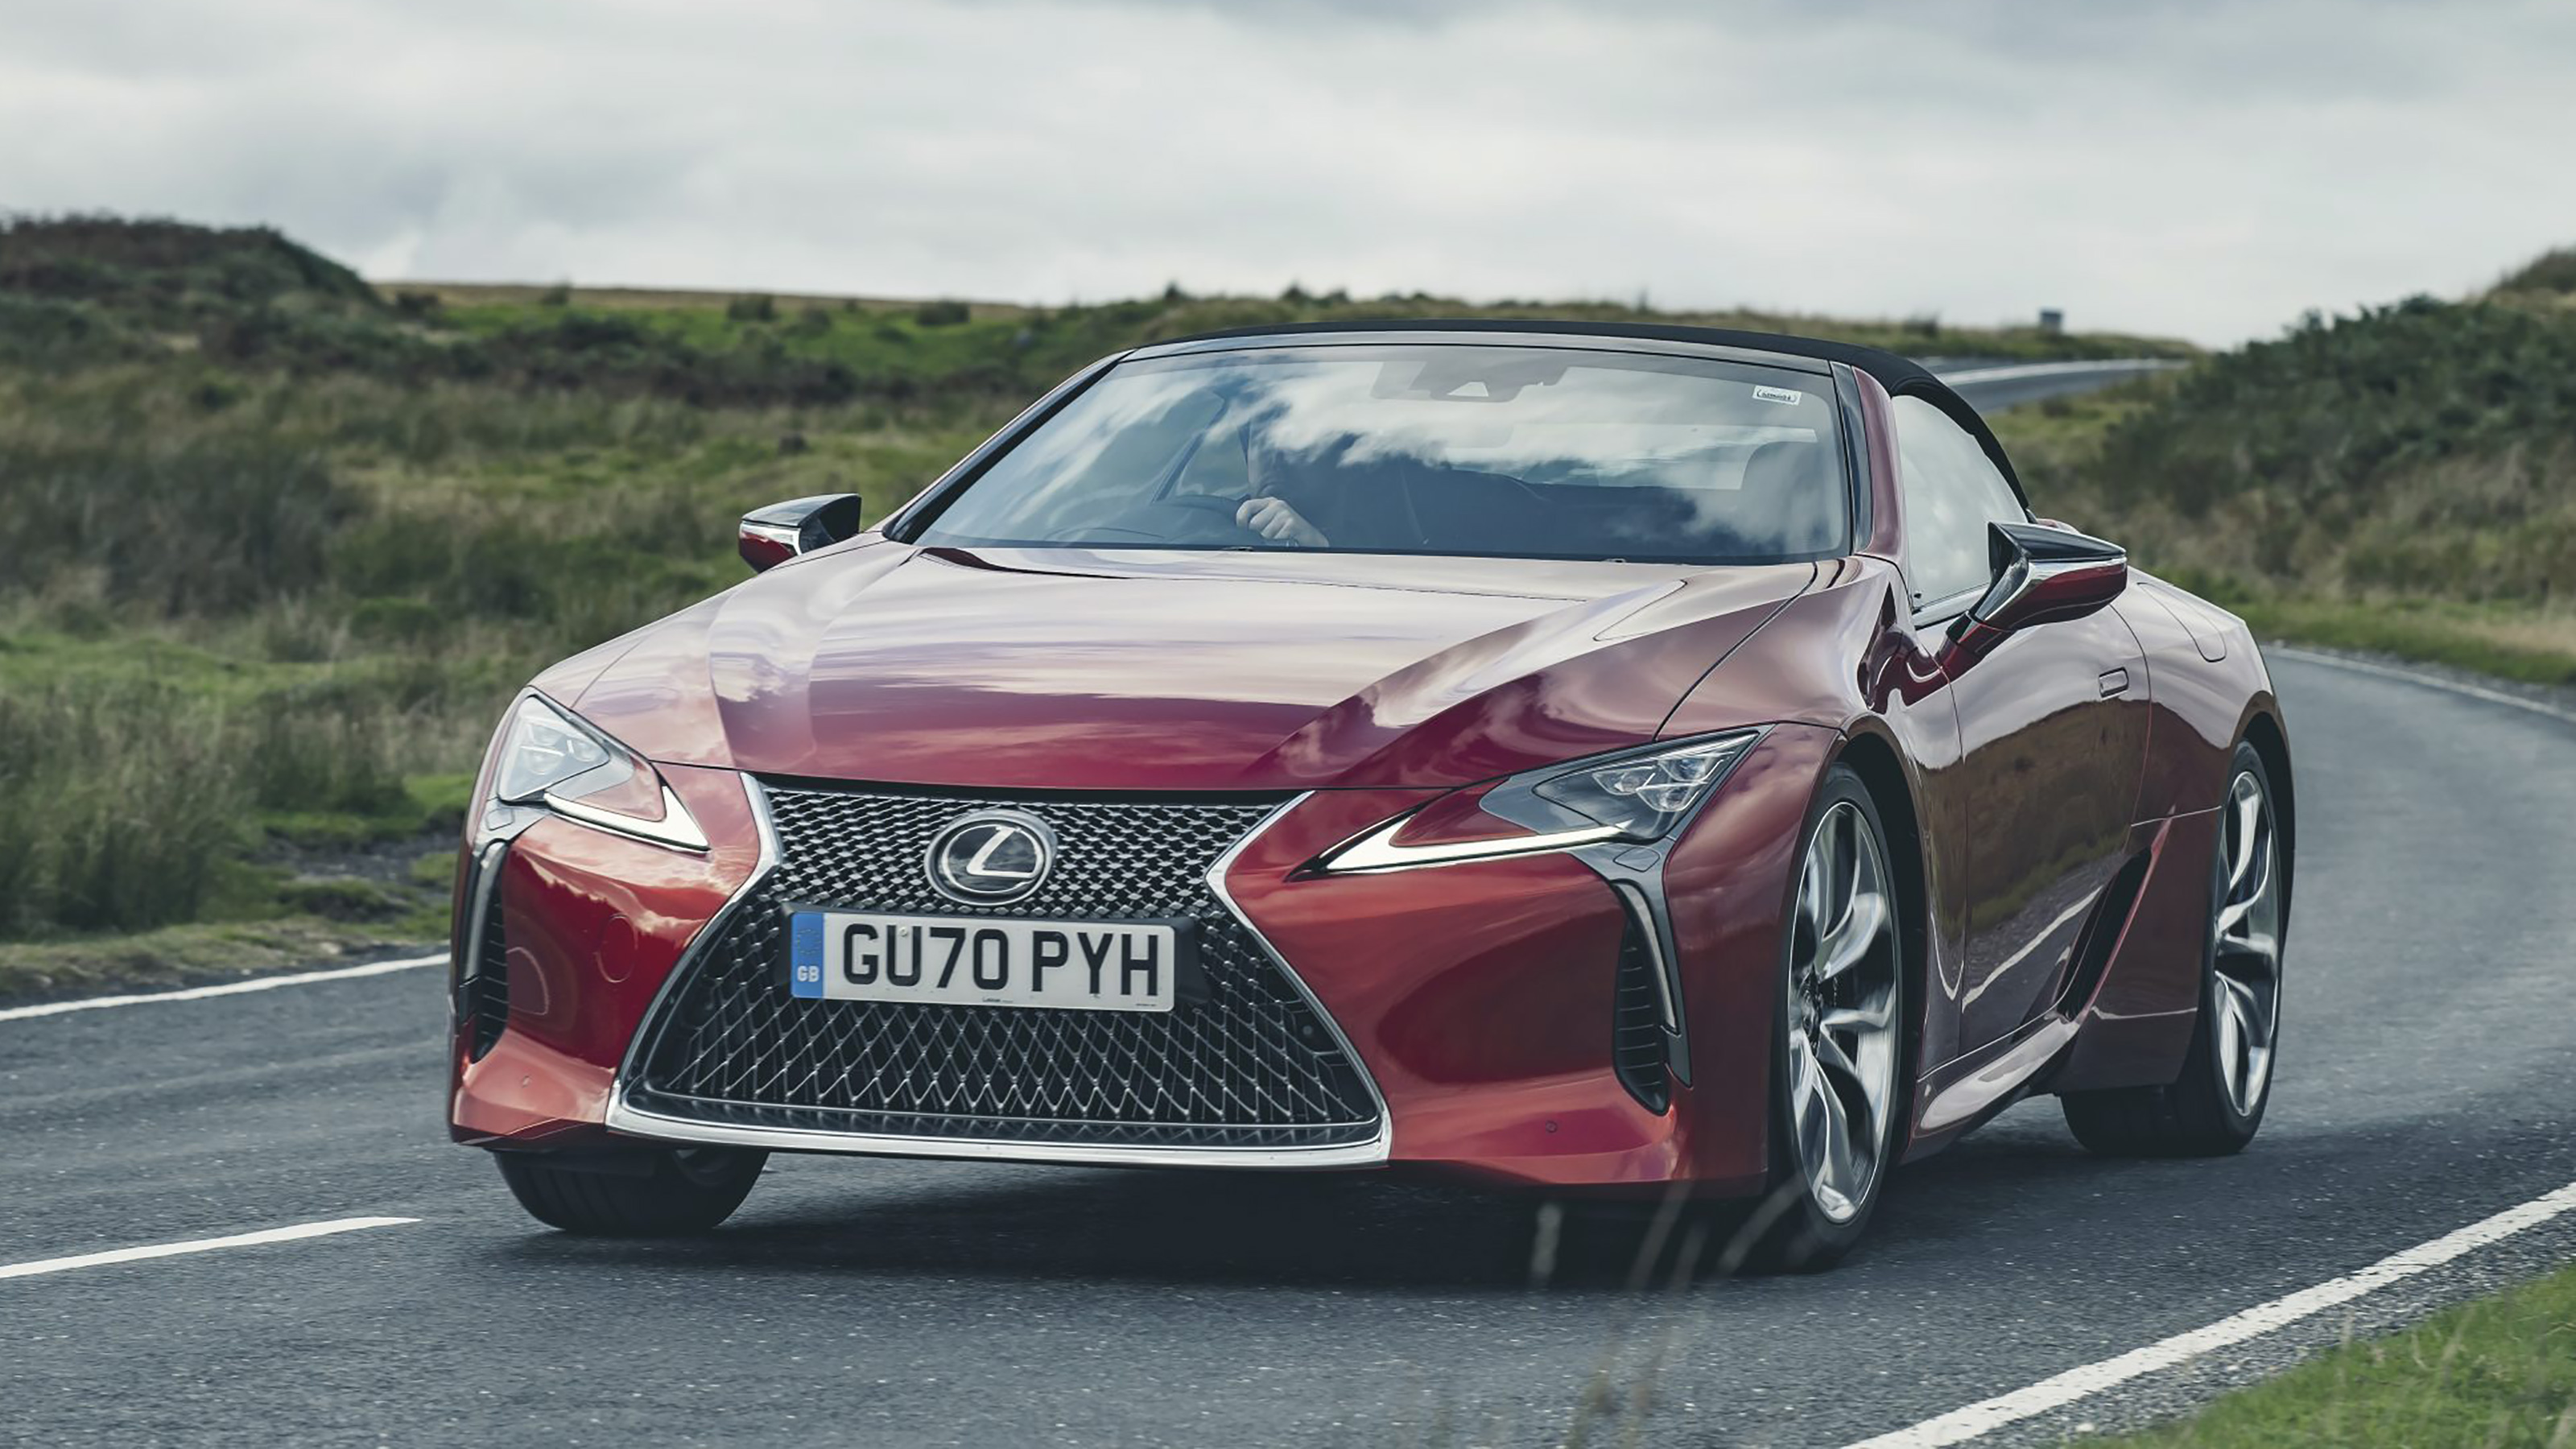 New 2020 Lexus LC Convertible on sale now  Auto Express